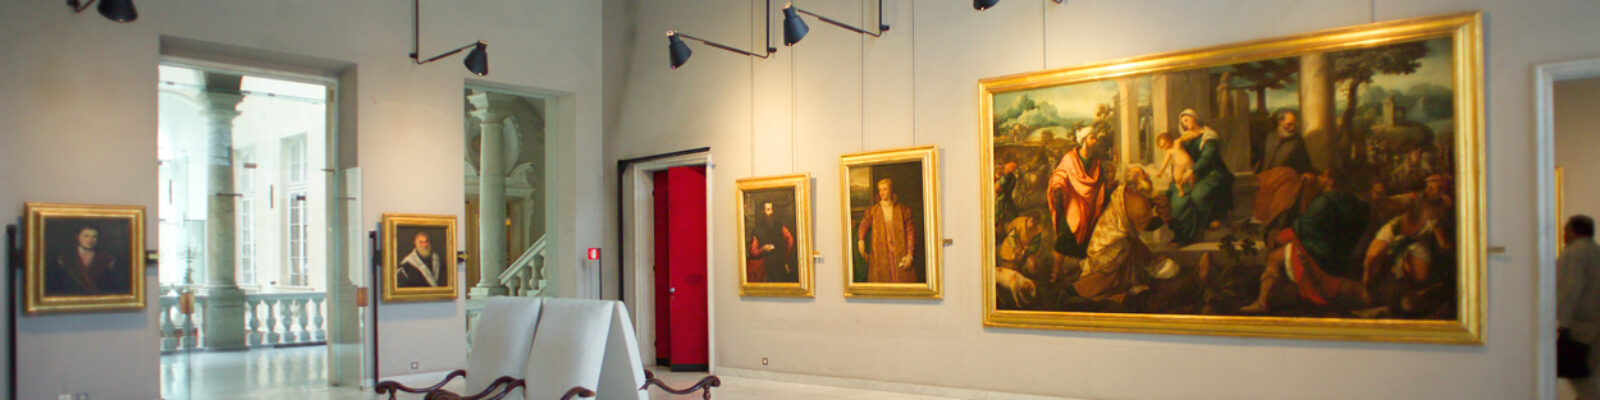 One of the rooms with the works on display and the lighting fixtures